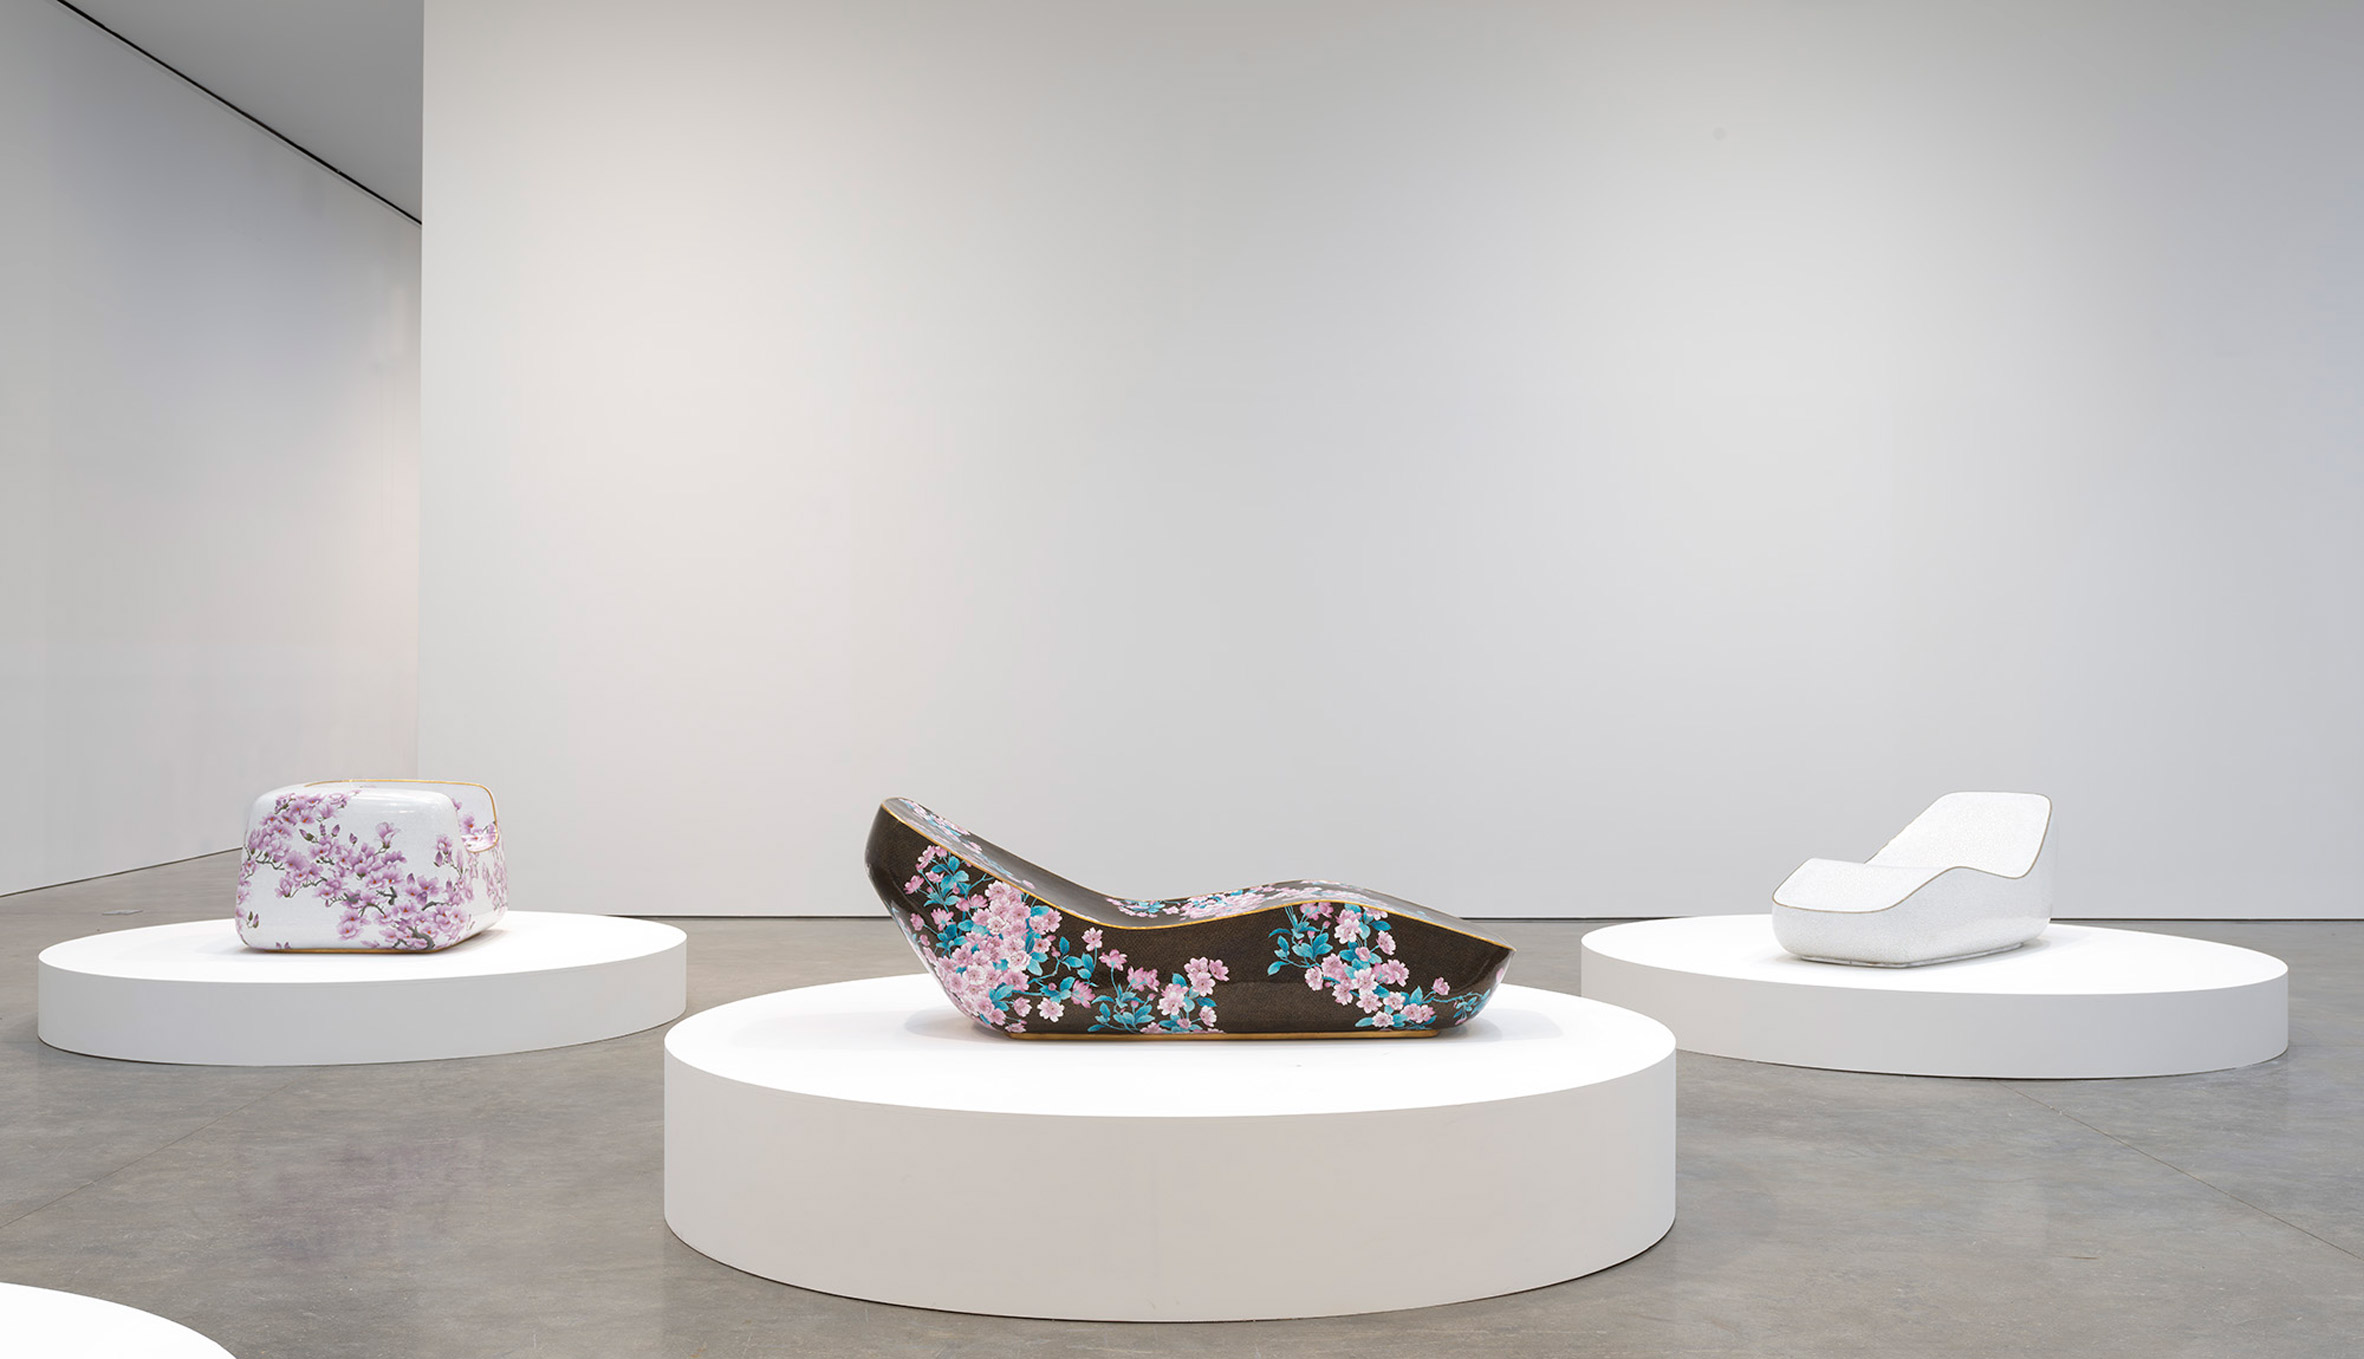 Marc Newson exhibition at Gagosian Gallery Chelsea